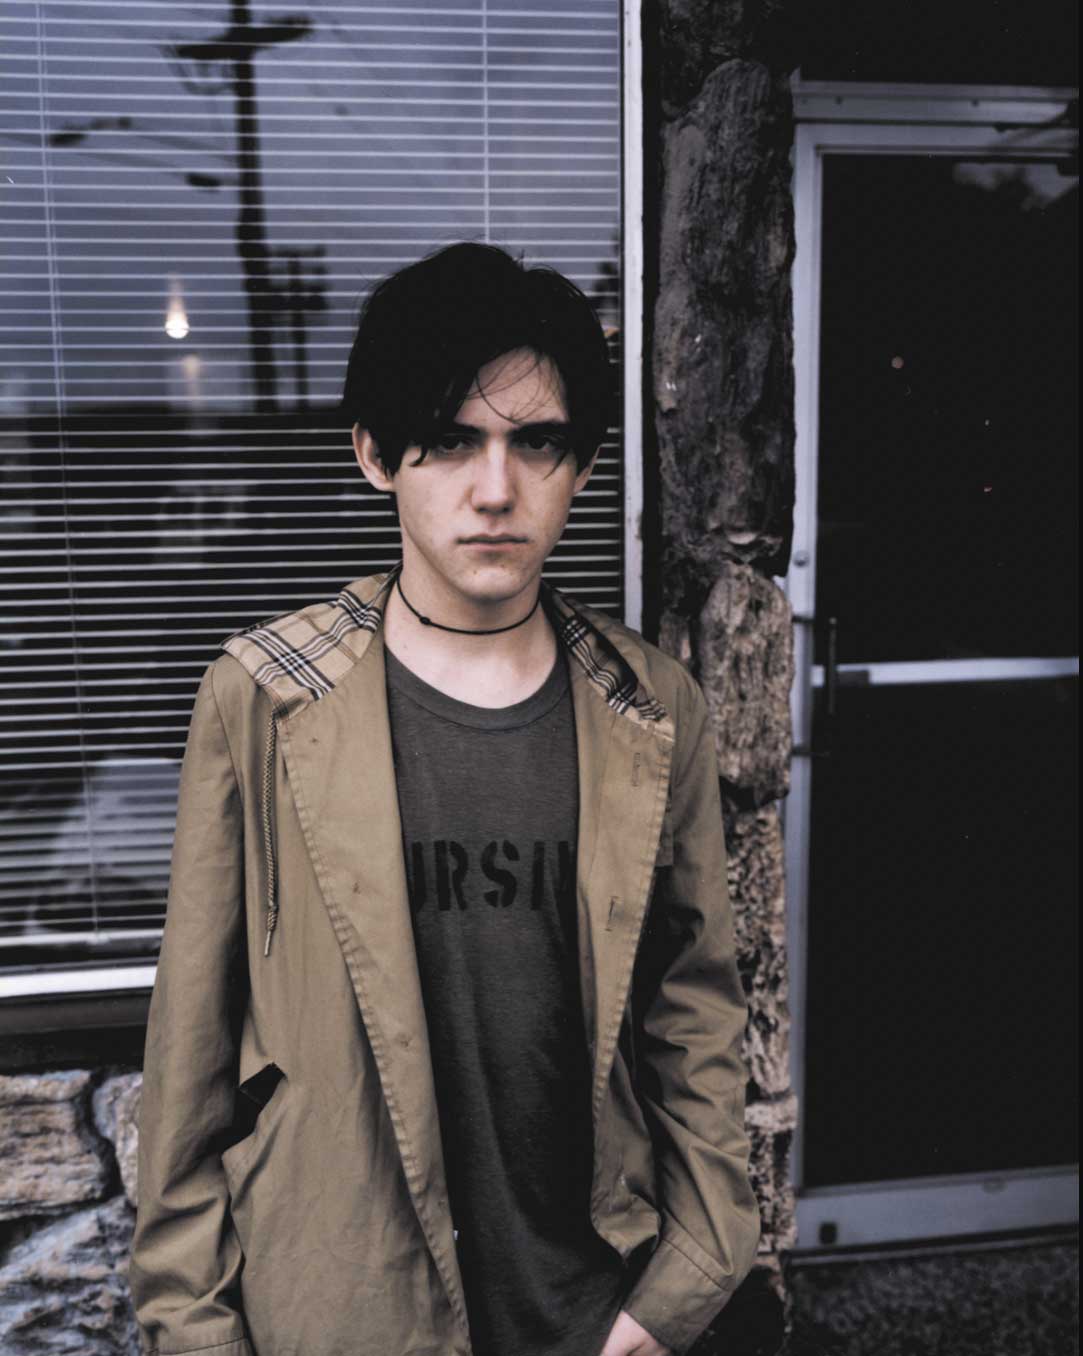 Conor Oberst standing in front of a window